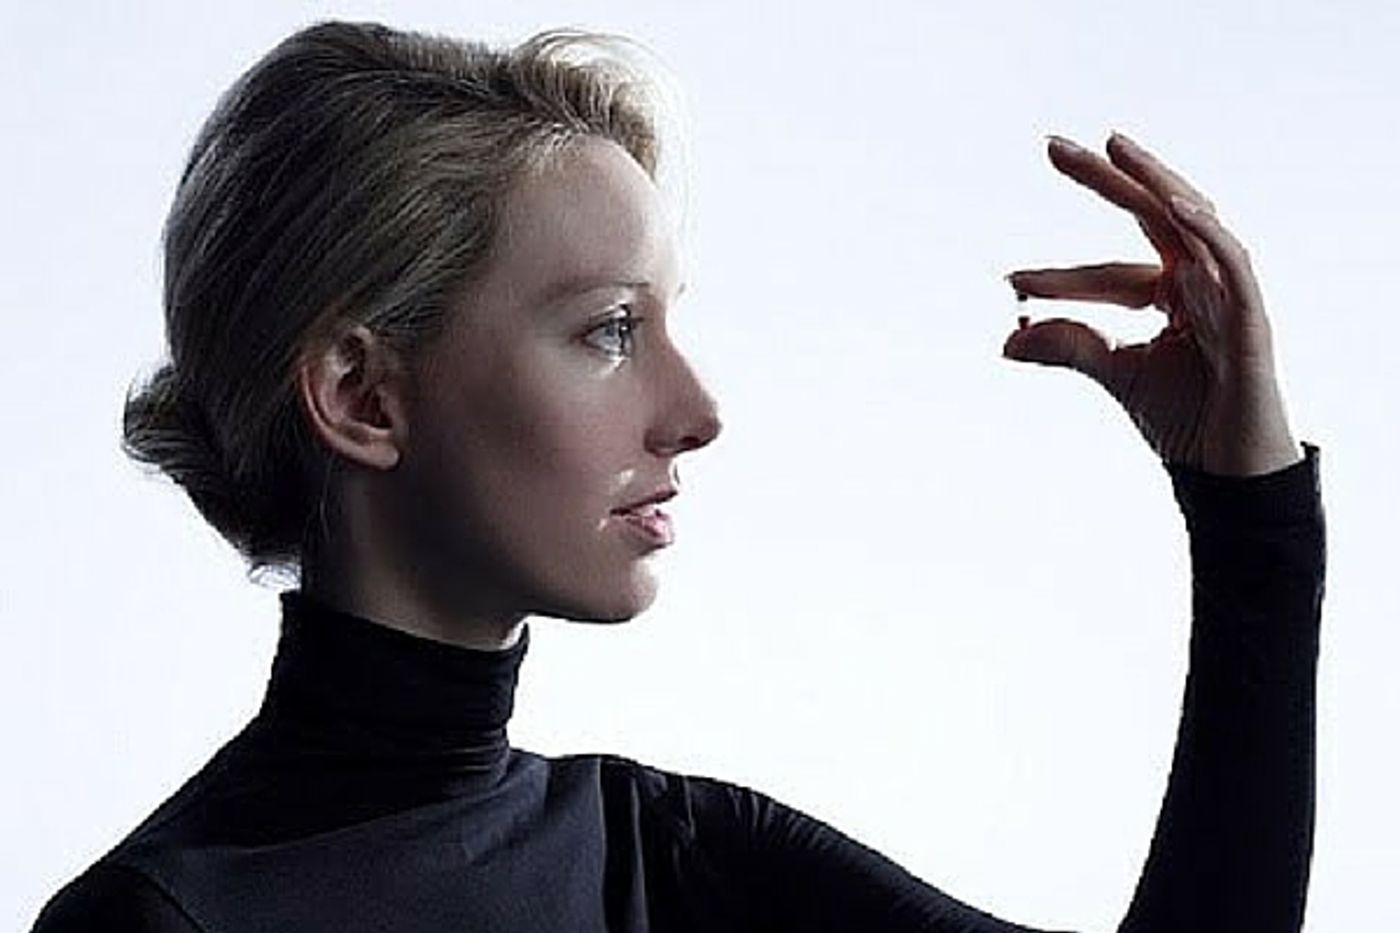 Elizabeth Holmes cannot own or operate a lab for two years